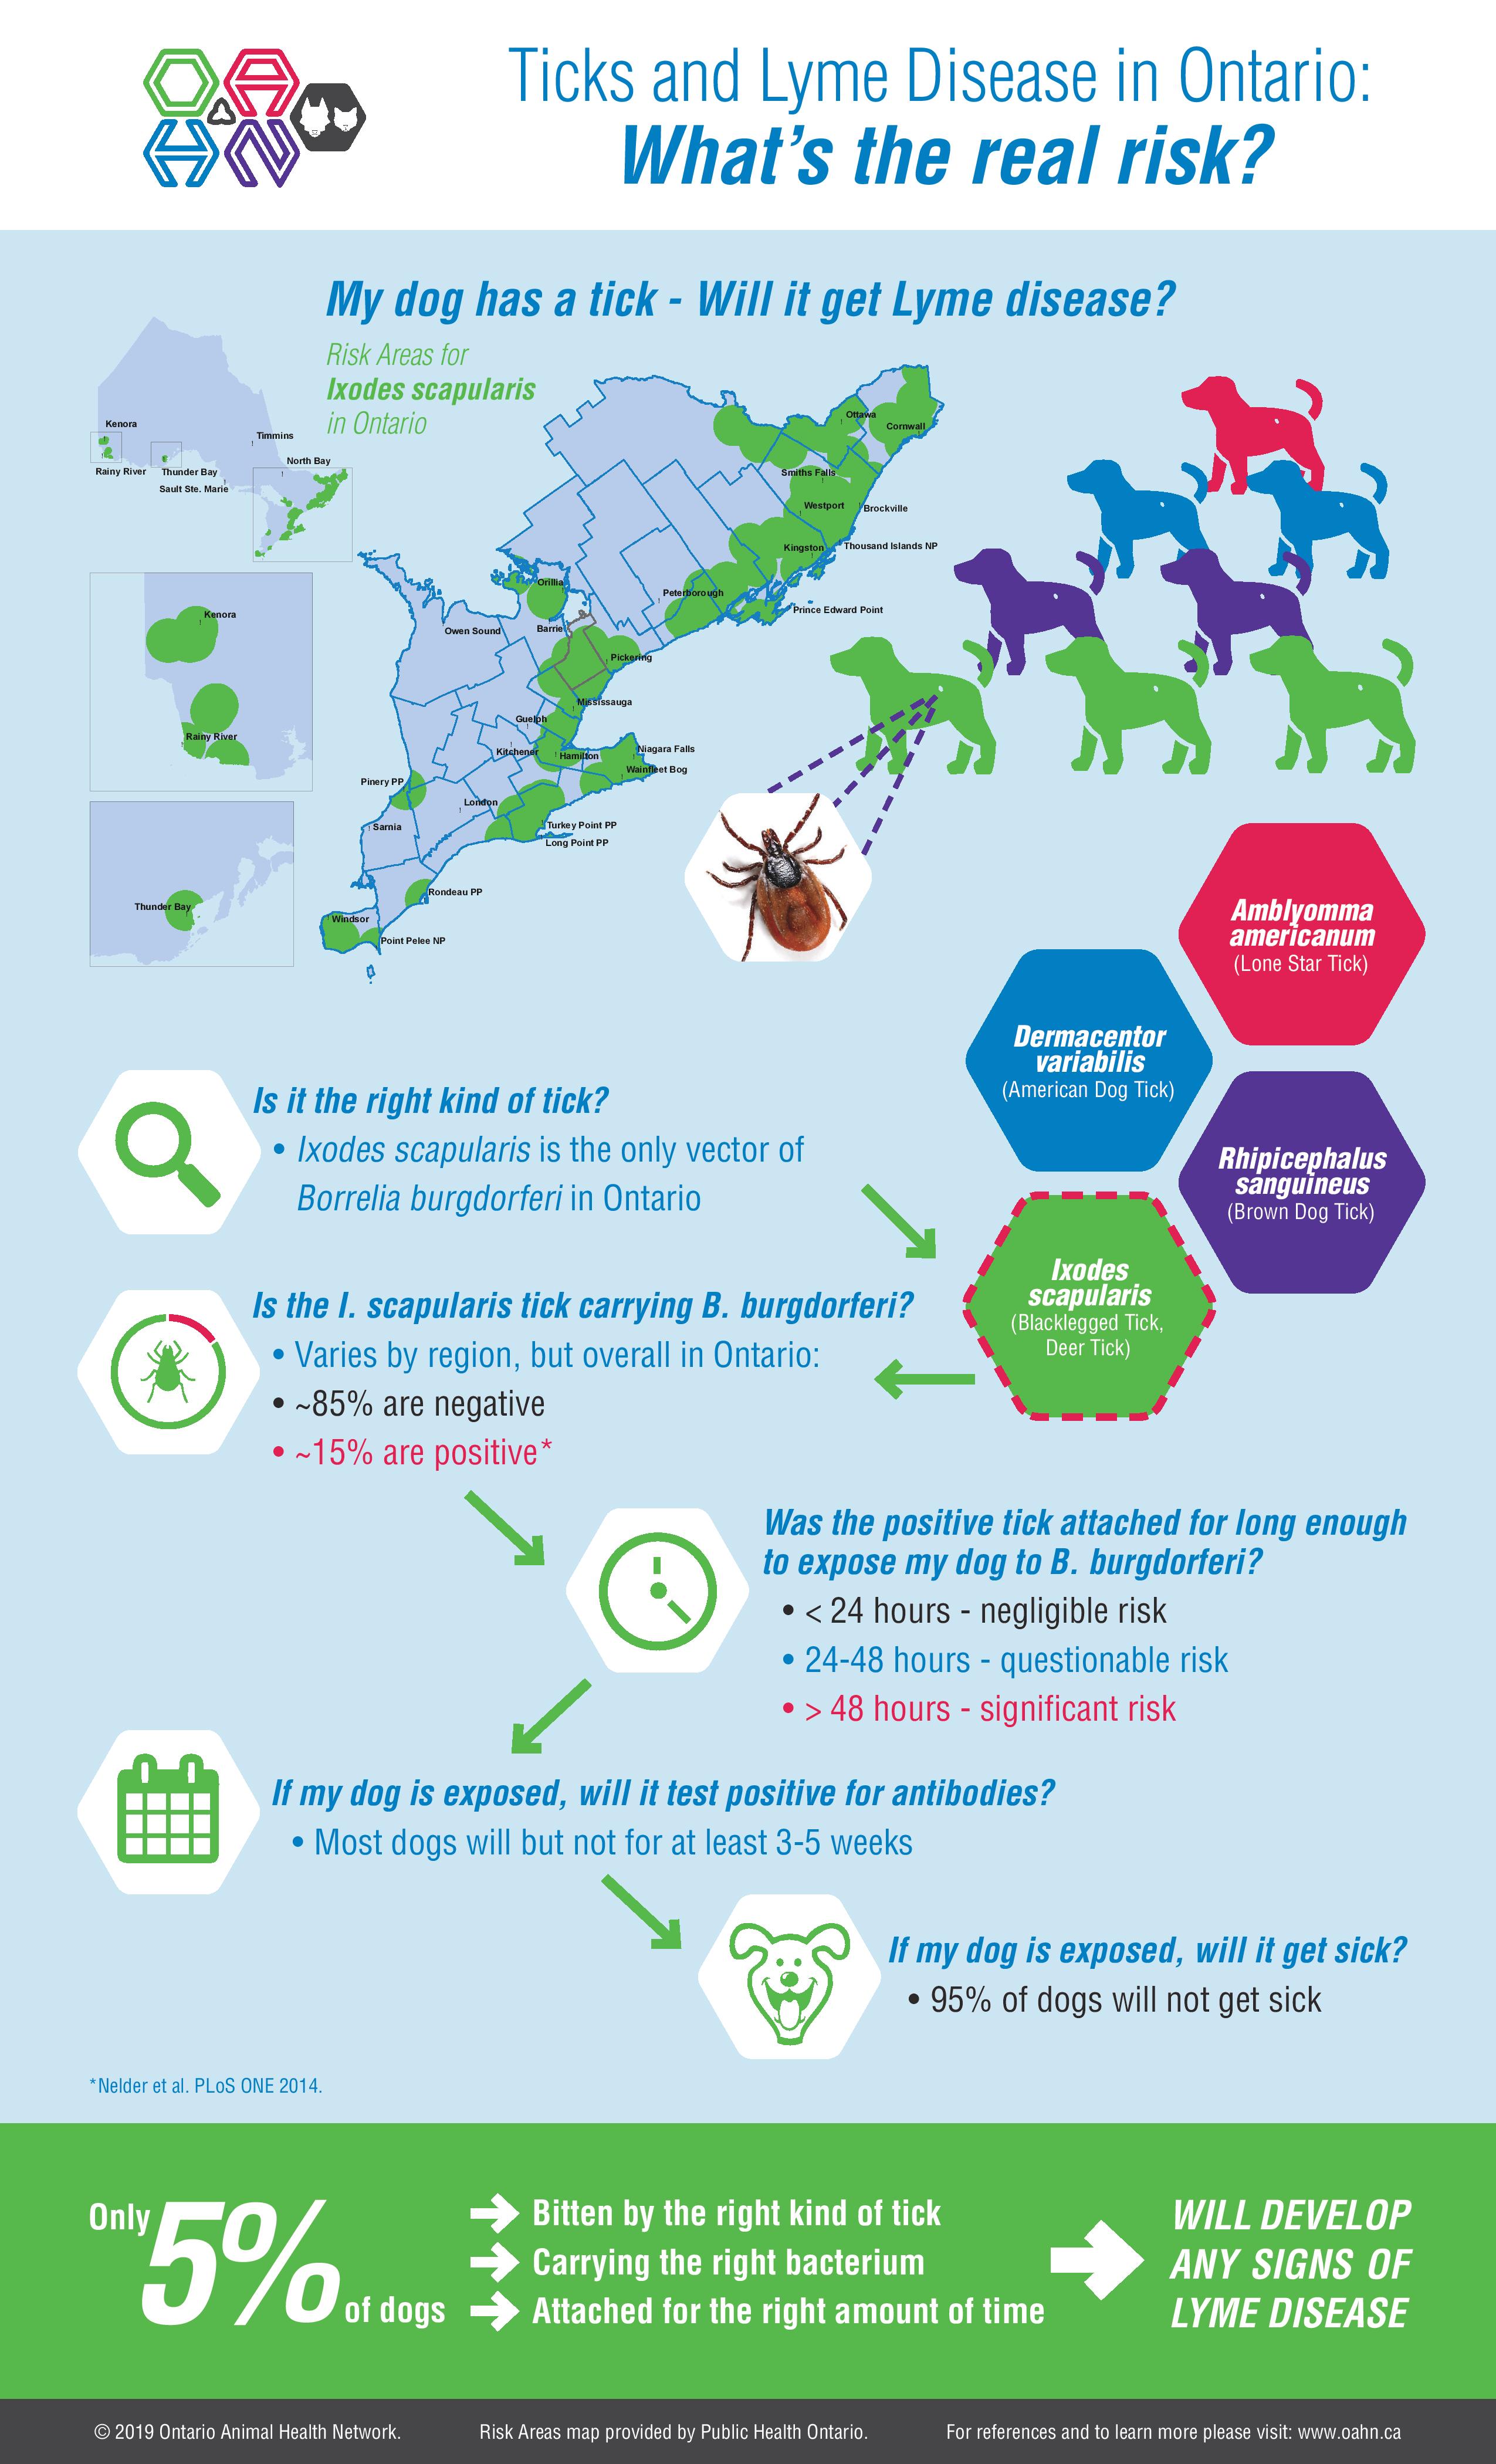 Ticks and Lyme Disease in Ontario What’s the real risk? Infographic